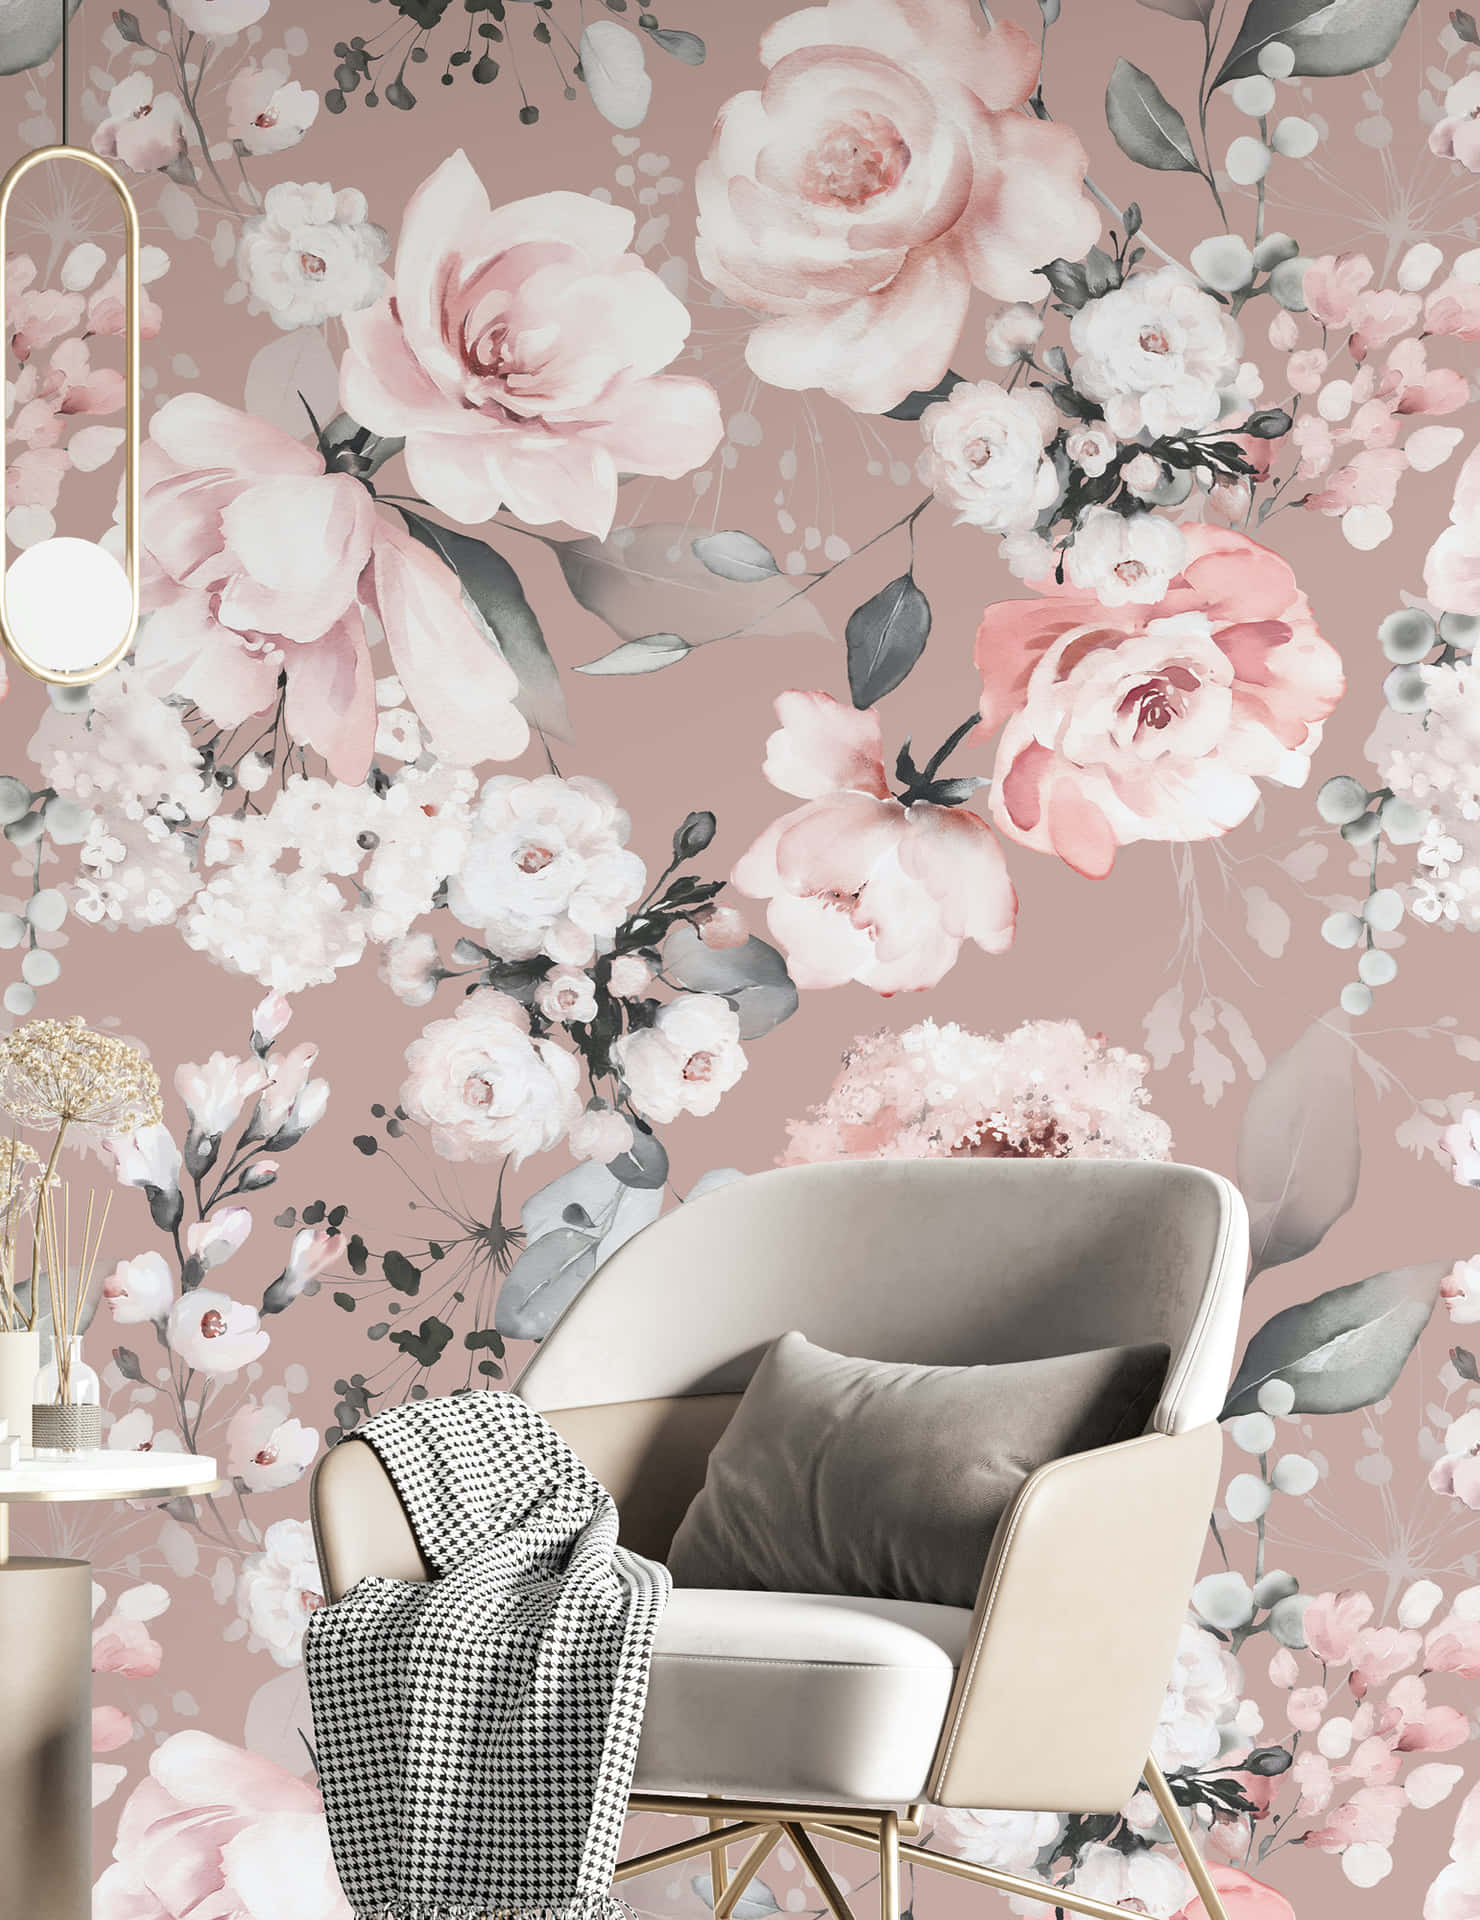 Carnation Watercolor Floral Patterns With Chair Wallpaper